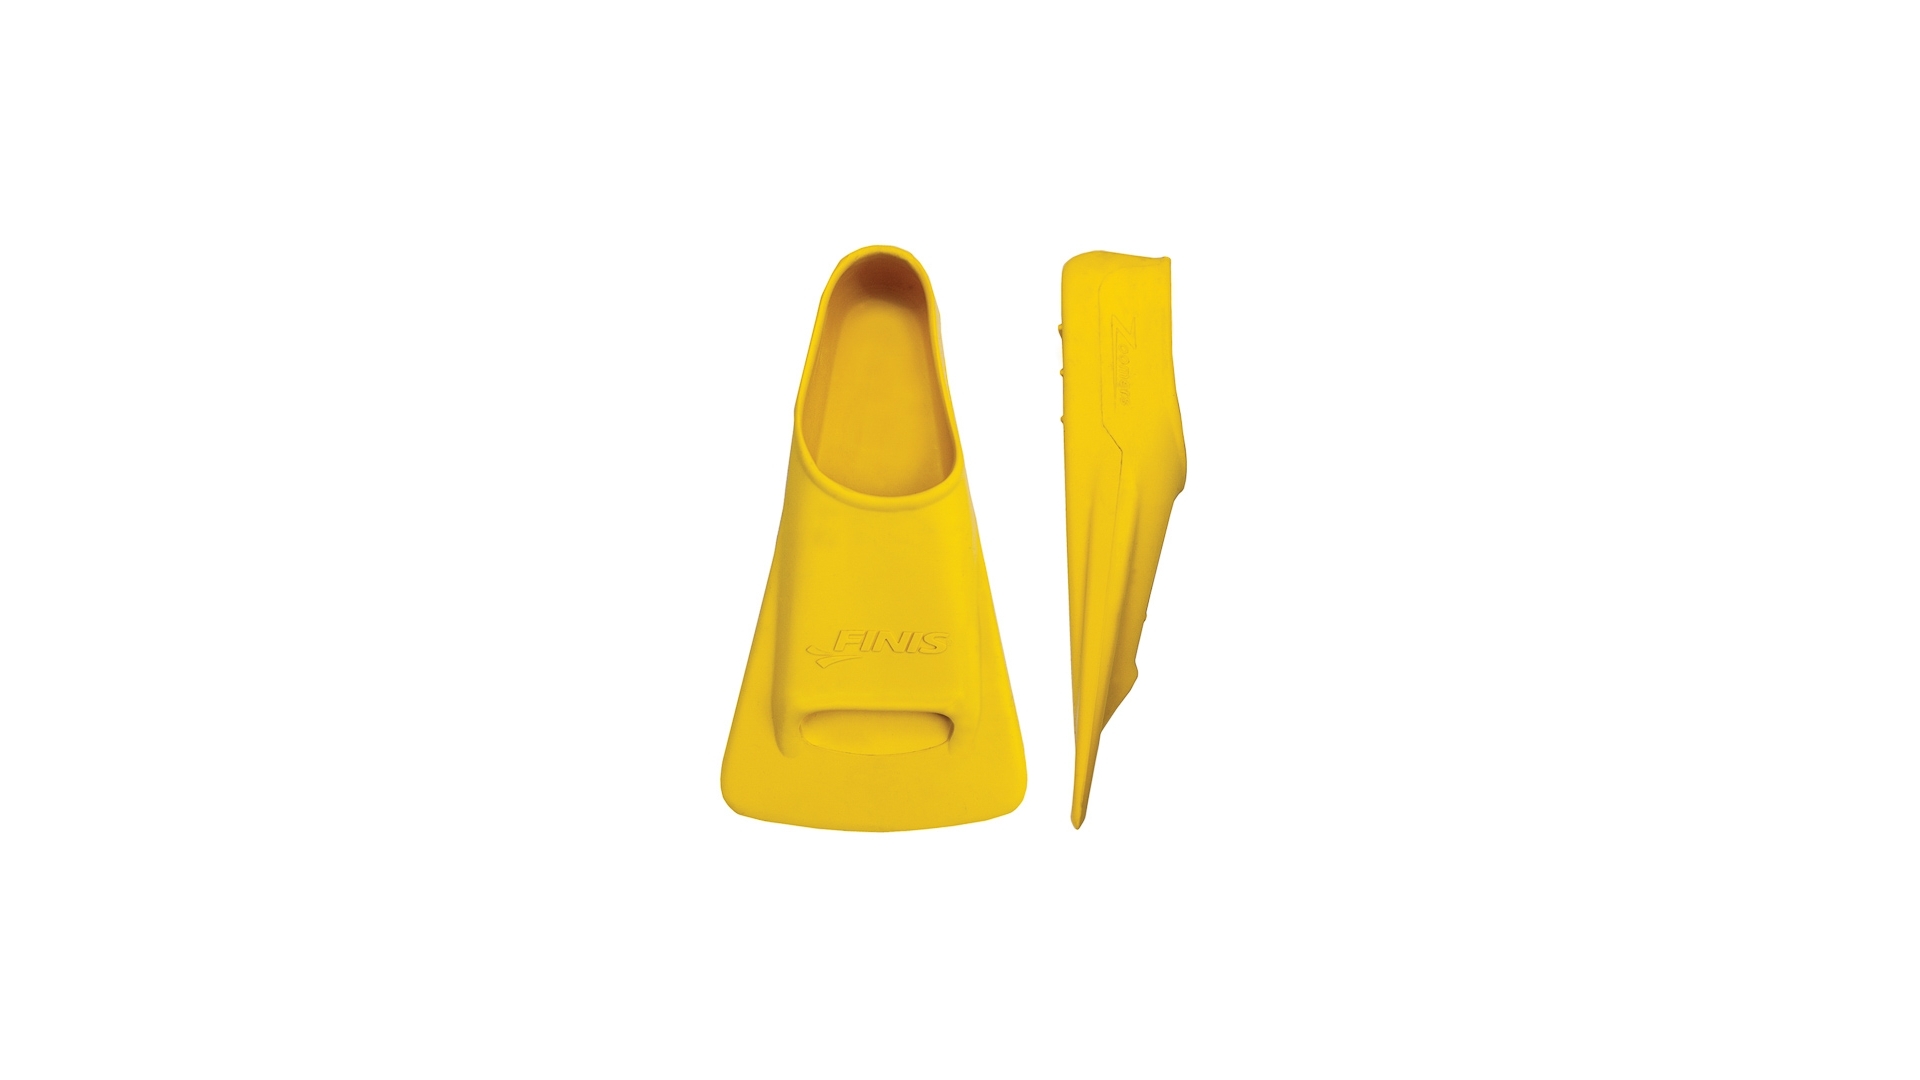 Finis Zoomers Gold training fins